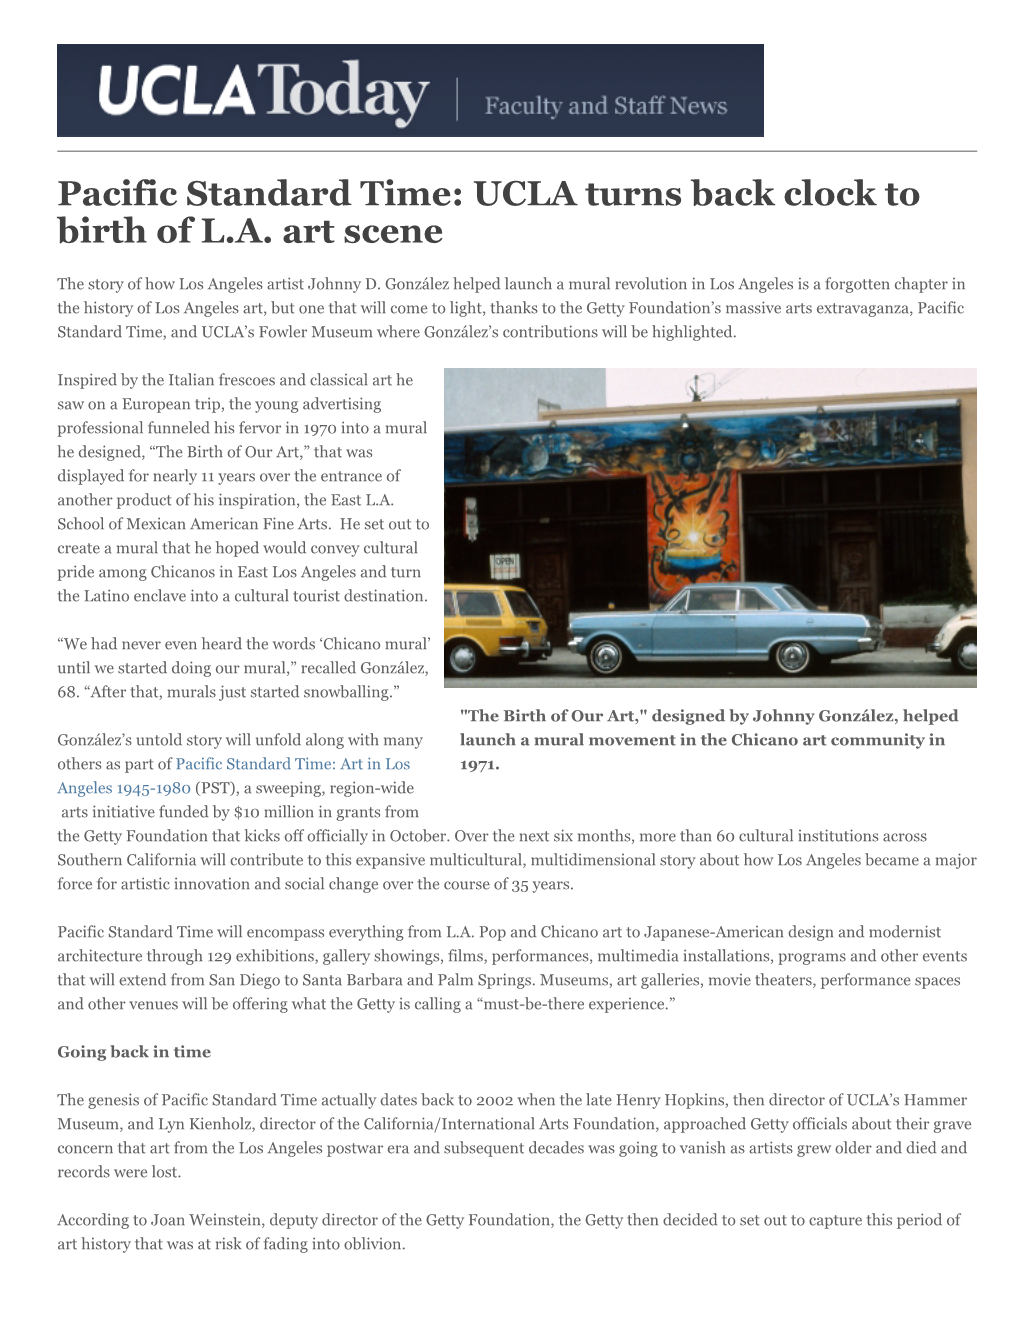 Pacific Standard Time UCLA Turns Back Clock to Birth of L.A. Art Scene